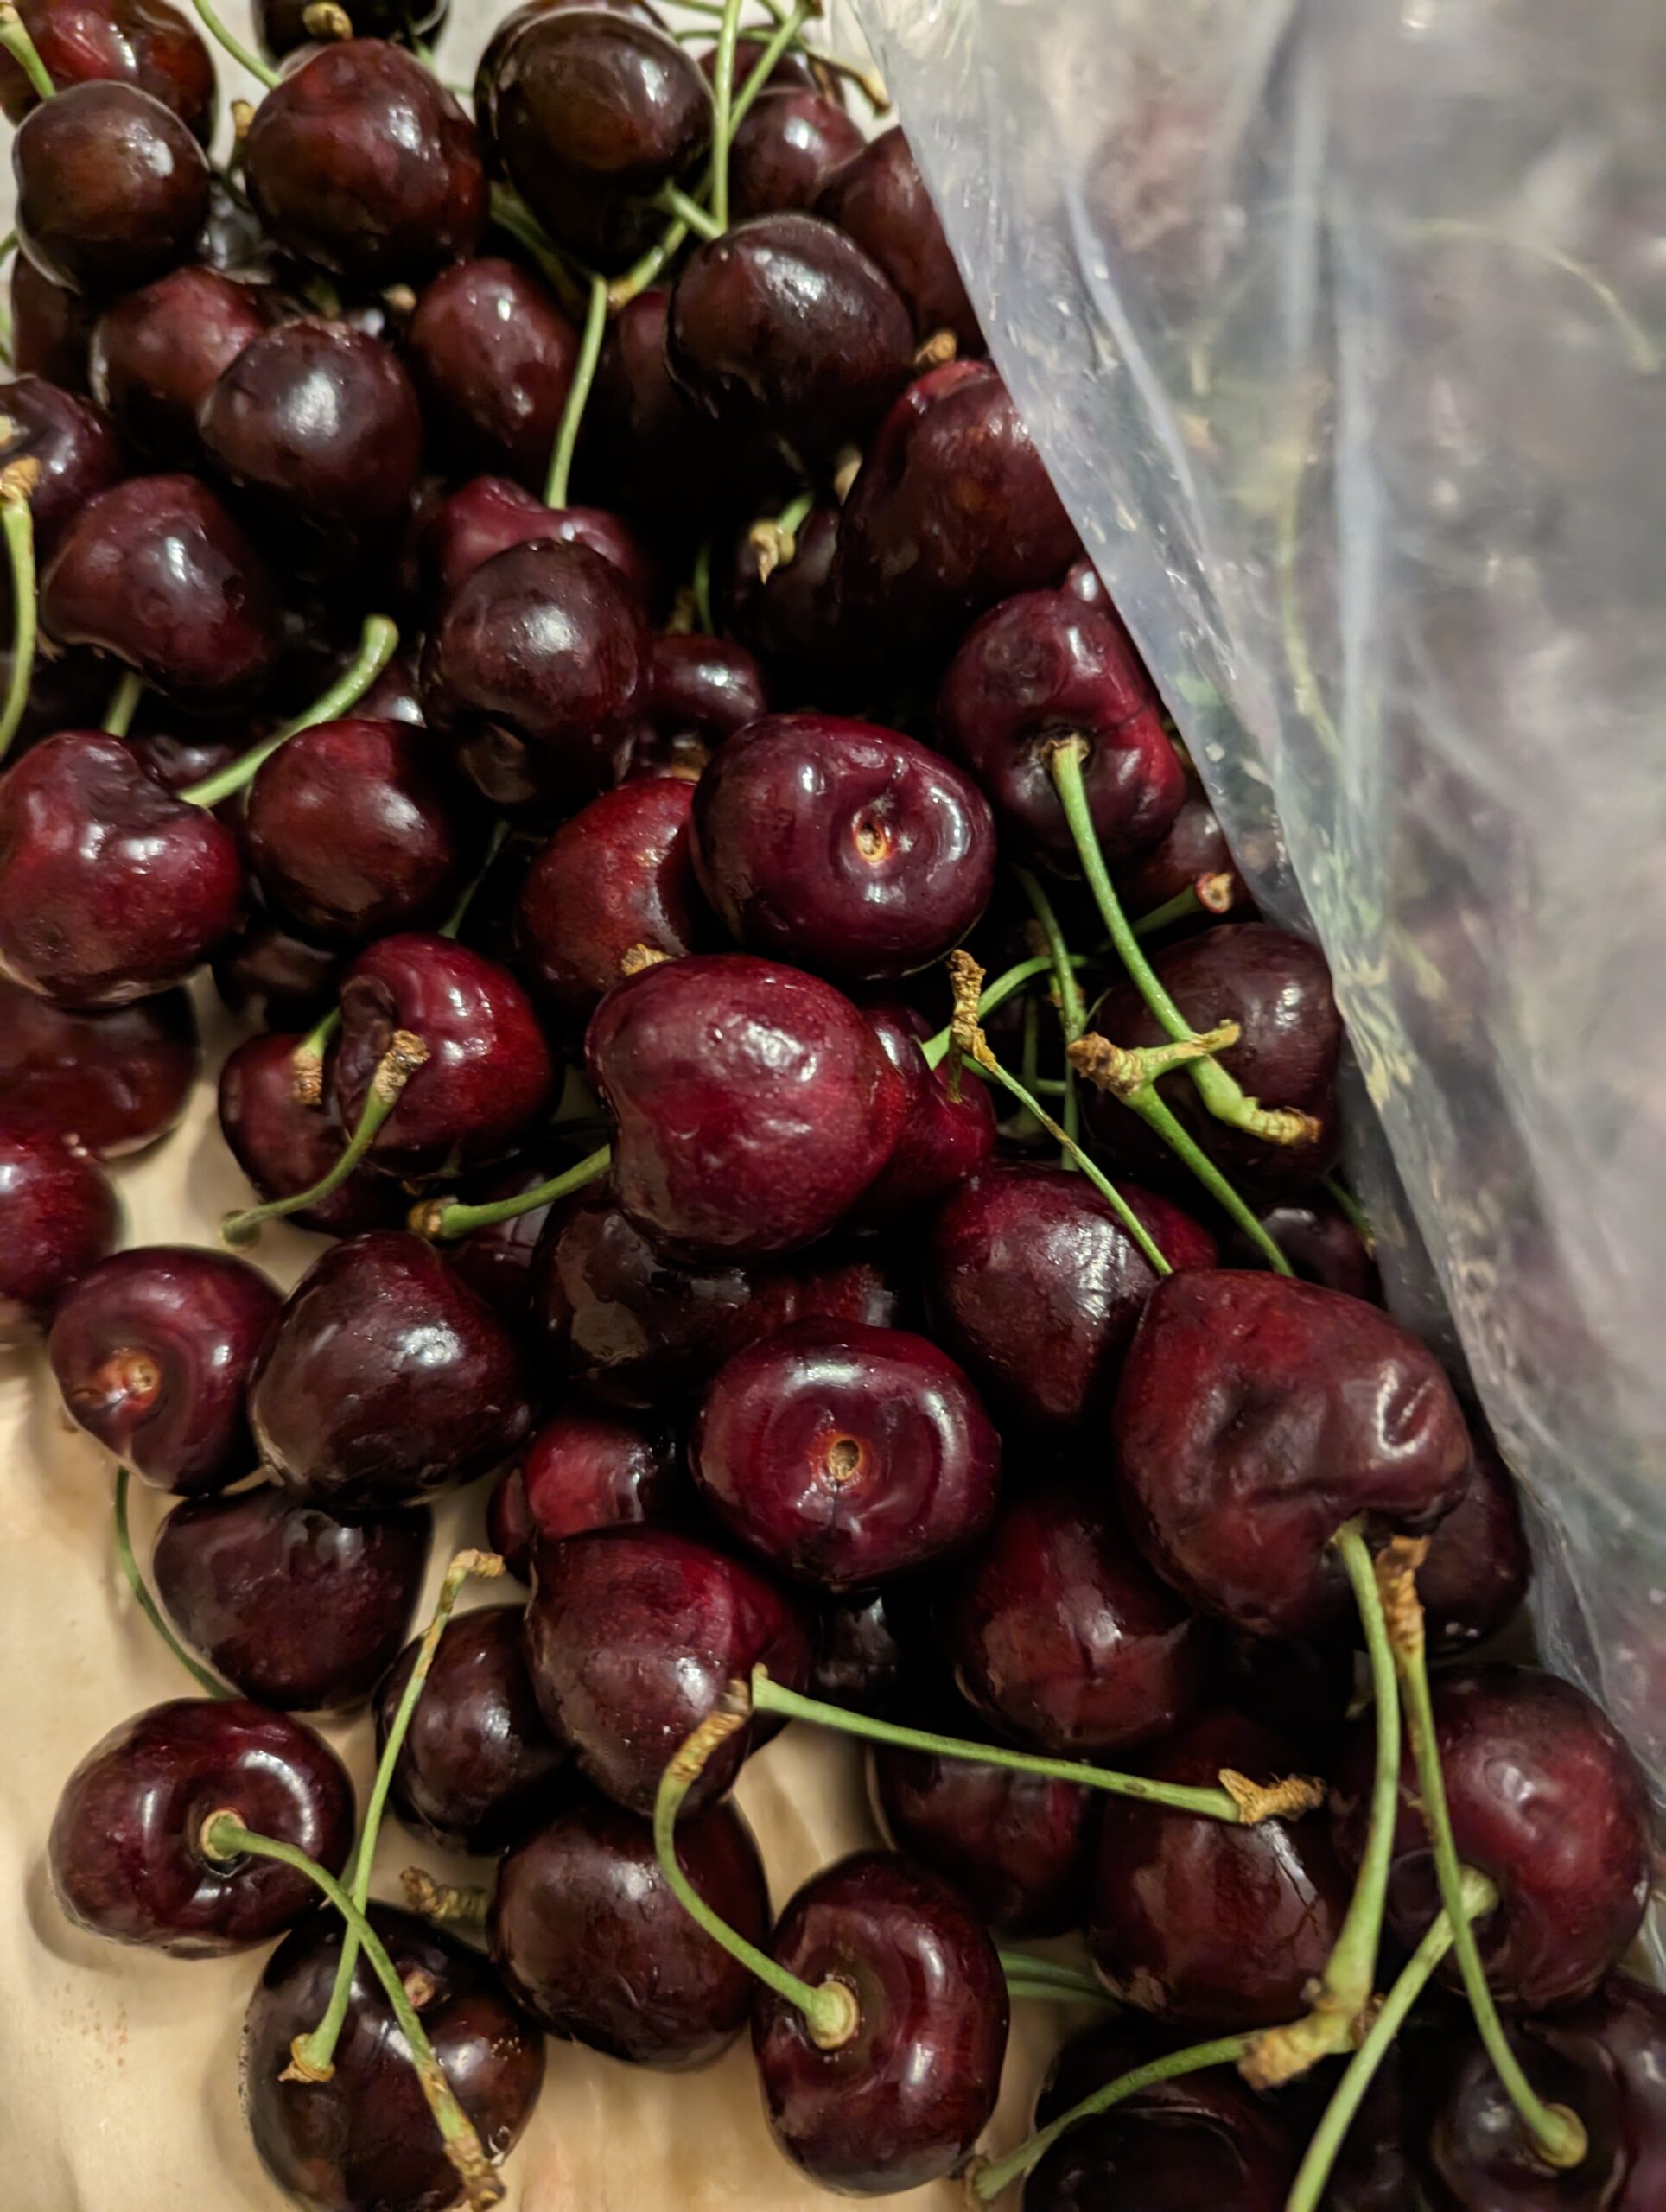 Loblaws complaint Poor quality of Cherry